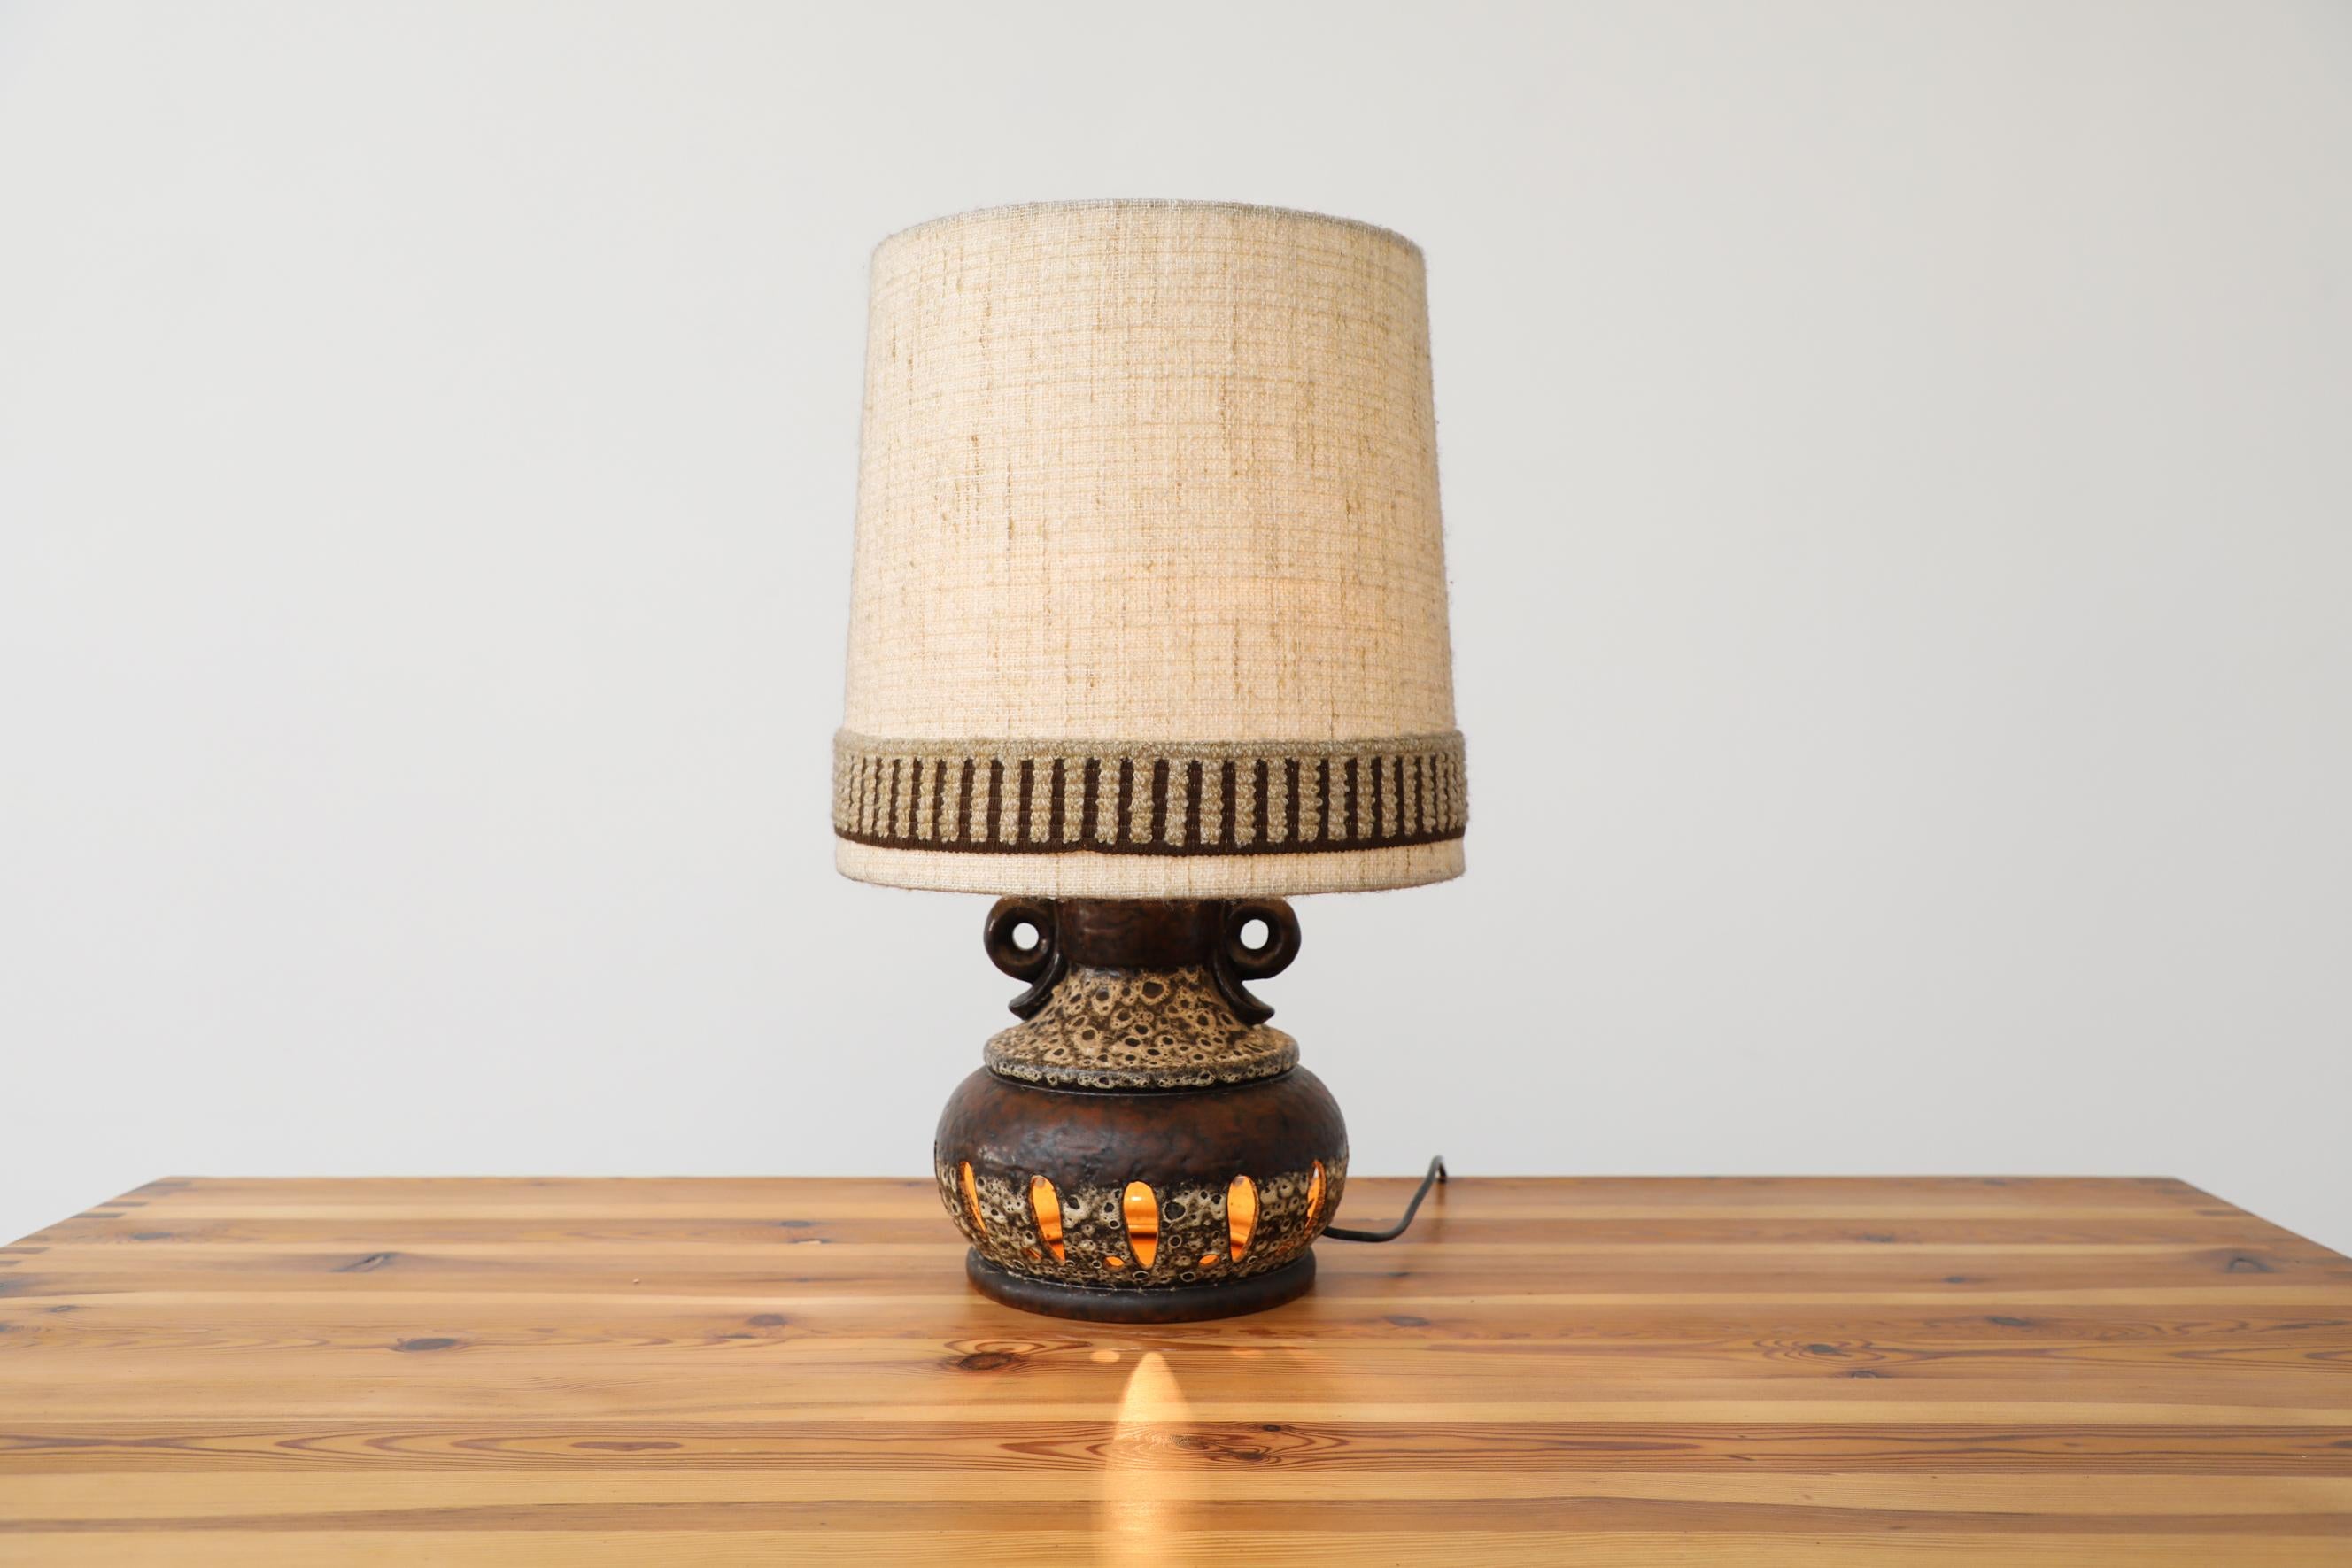 Midcentury W. German ceramic table lamp with cut-outs. This lamp has Dual lighting; one medium base above and a Euro candelabra light bulb below, illuminating the cut-outs. It has a 3-way switch allowing you to choose up, down lighting or both. It